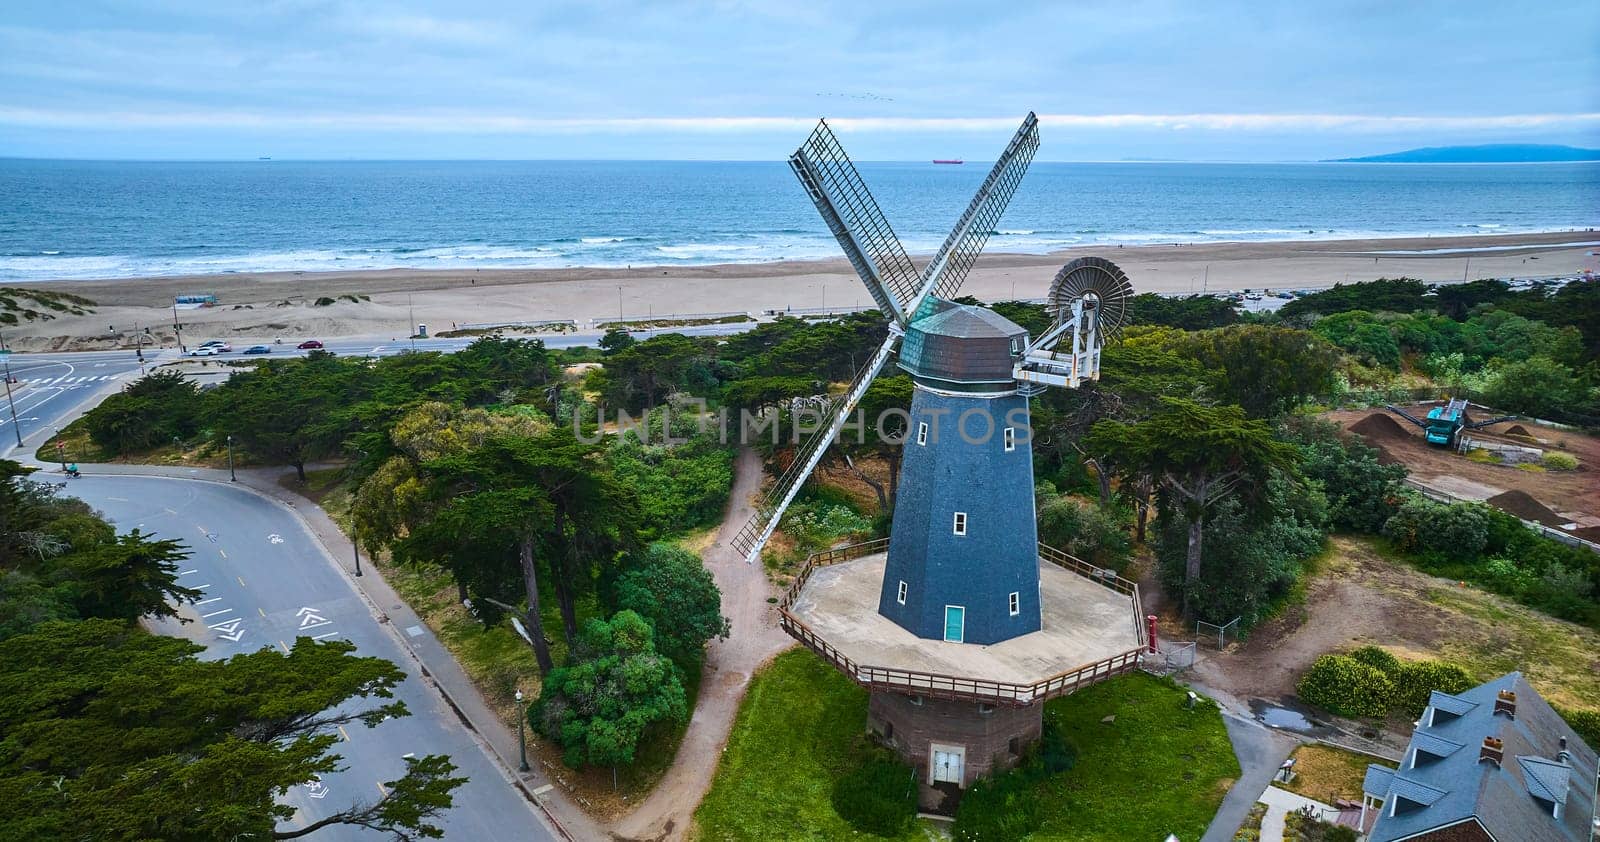 Image of Blue murphy windmill surrounded by trees and roads overlooking blue ocean with sandy shore aerial